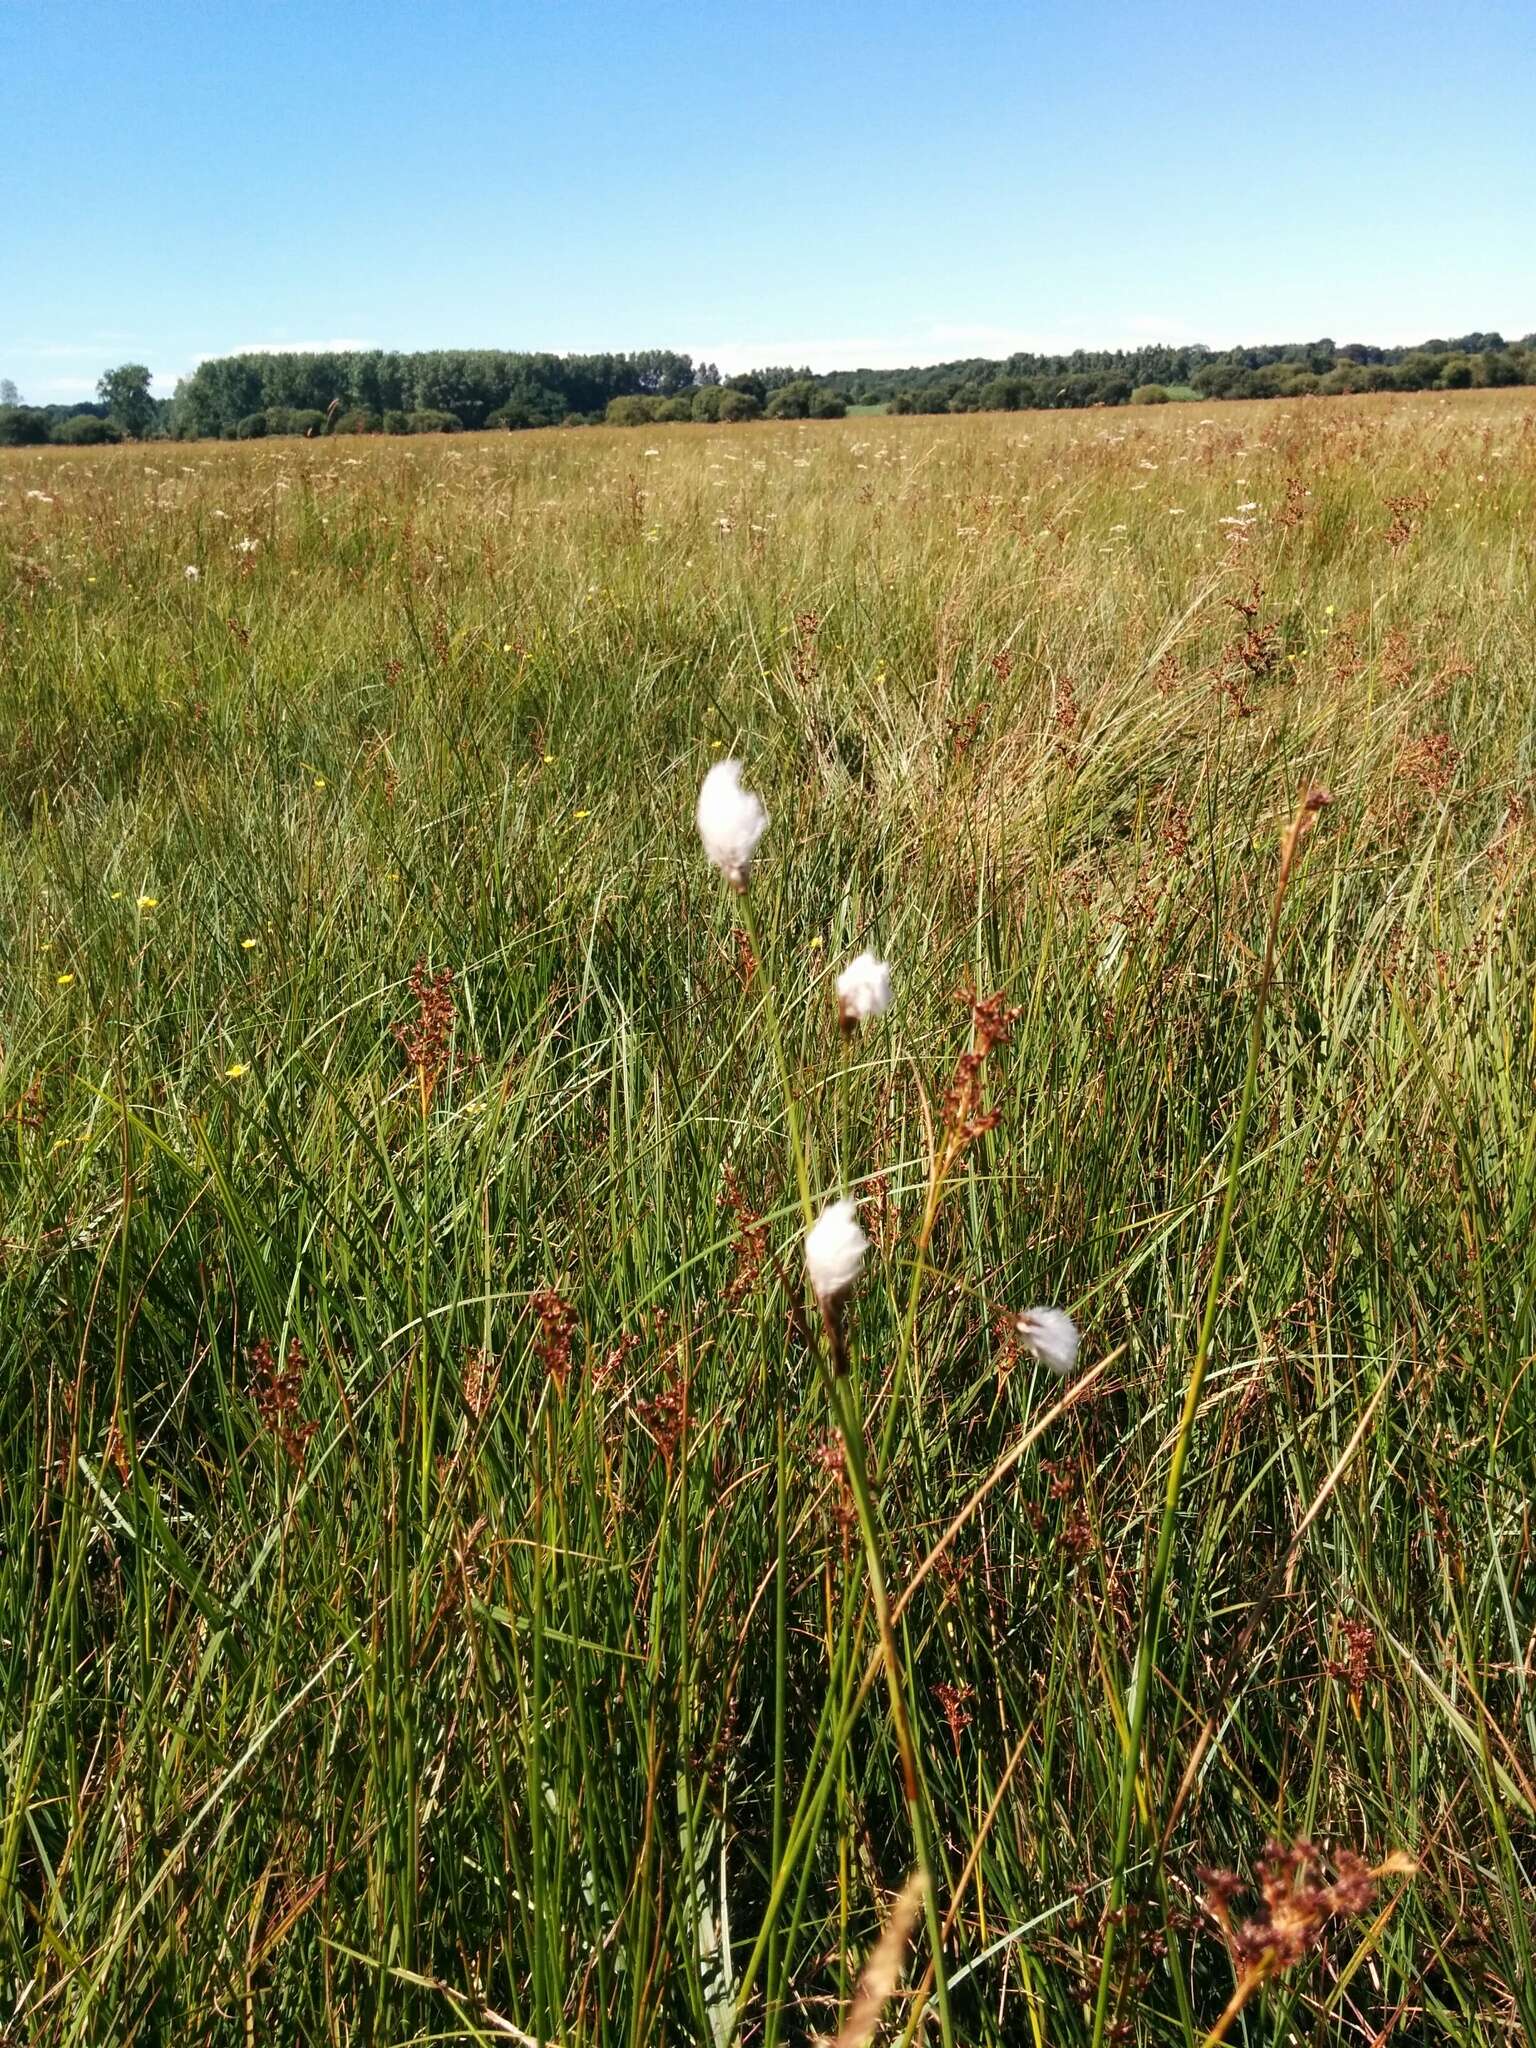 Image of broad-leaved cottongrass